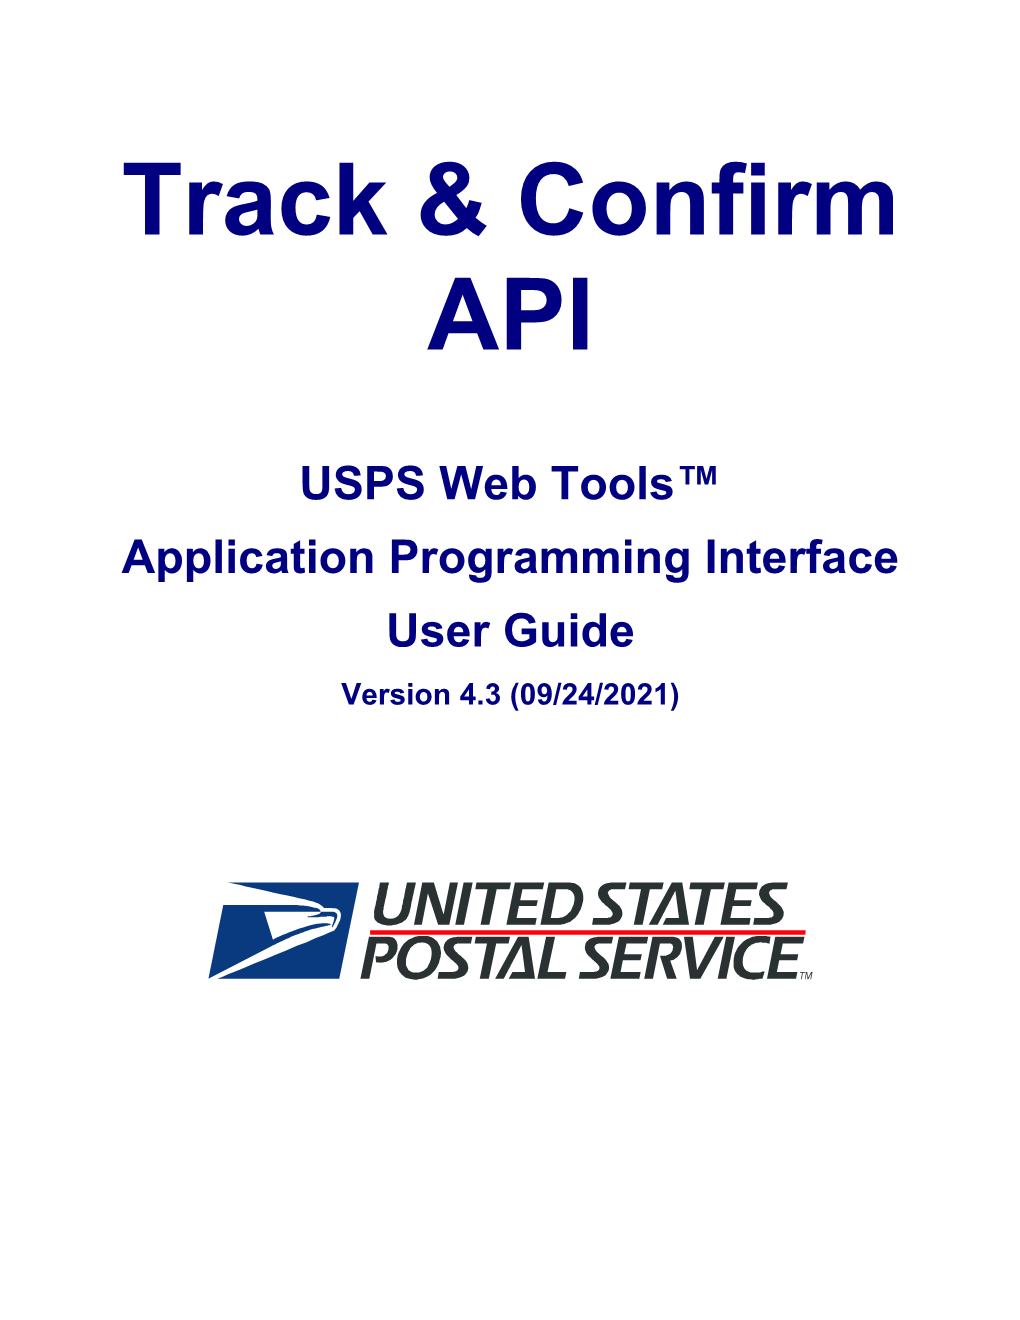 Track & Confirm API USPS Web Tools™ Application Programming Interface User's Guide